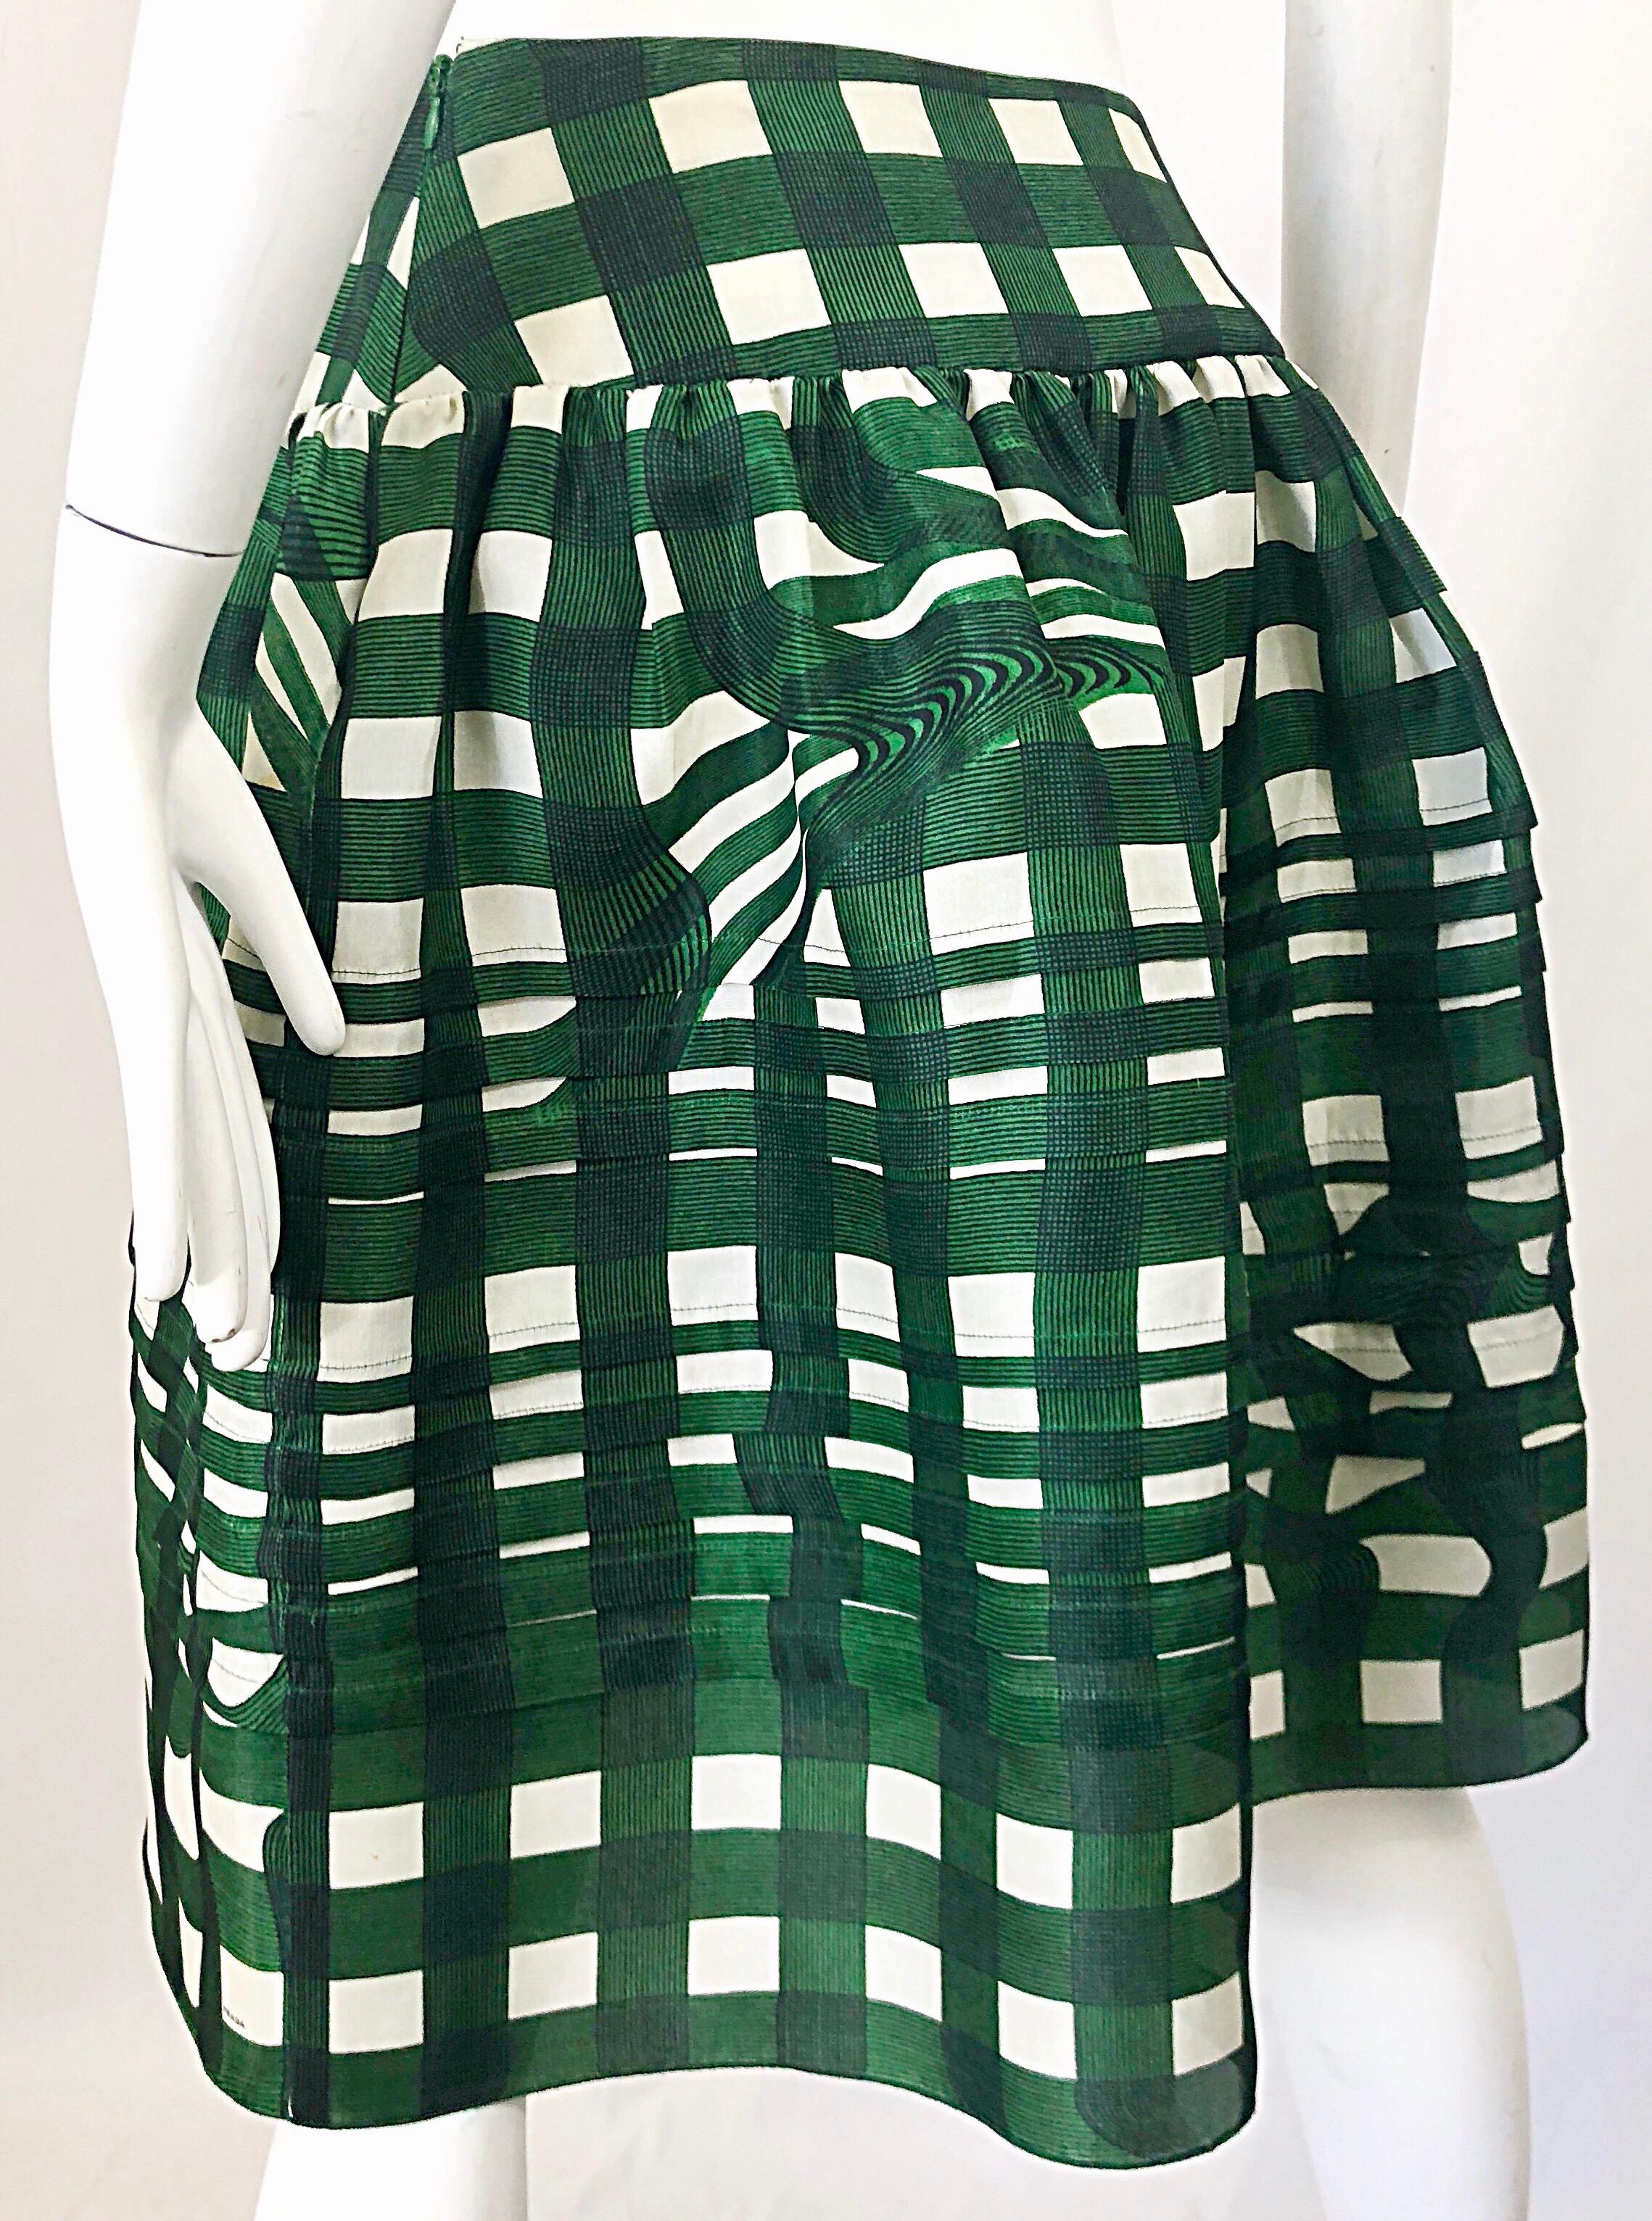 Prada Spring 2008 Runway Fairy Collection Green + White A - Line Skirt Size 40  2